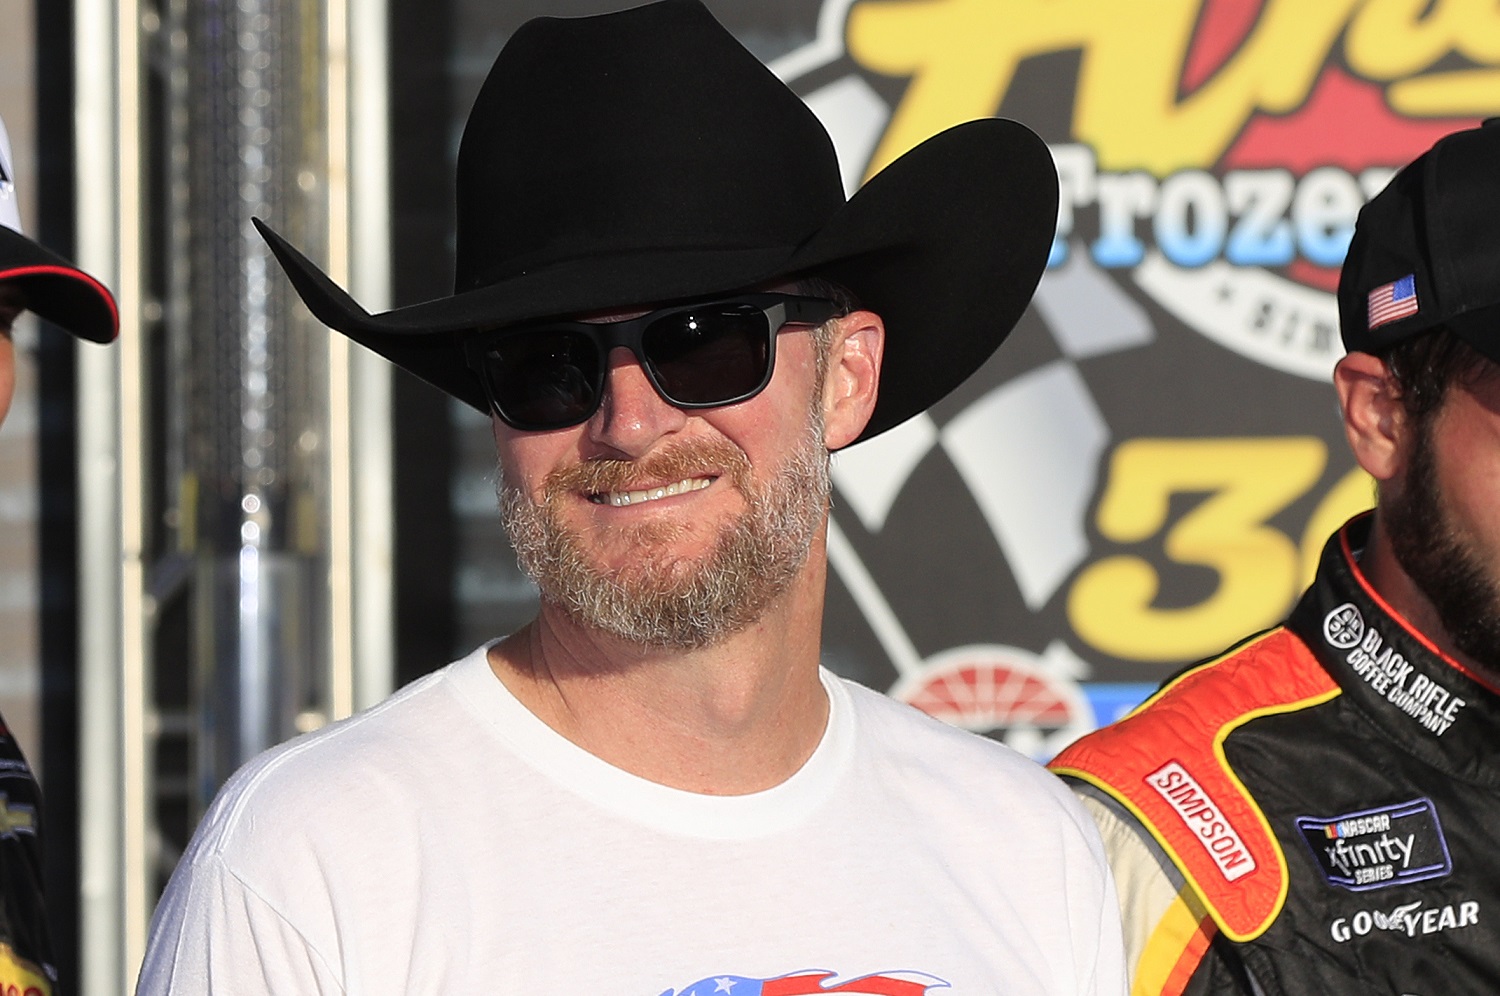 Dale Earnhardt, Jr. in Victory Lane after the Andy's Frozen Custard 300 NASCAR Xfinity Series race on Sept. 24, 2022 at the Texas Motor Speedway. | David J. Griffin/Icon Sportswire via Getty Images